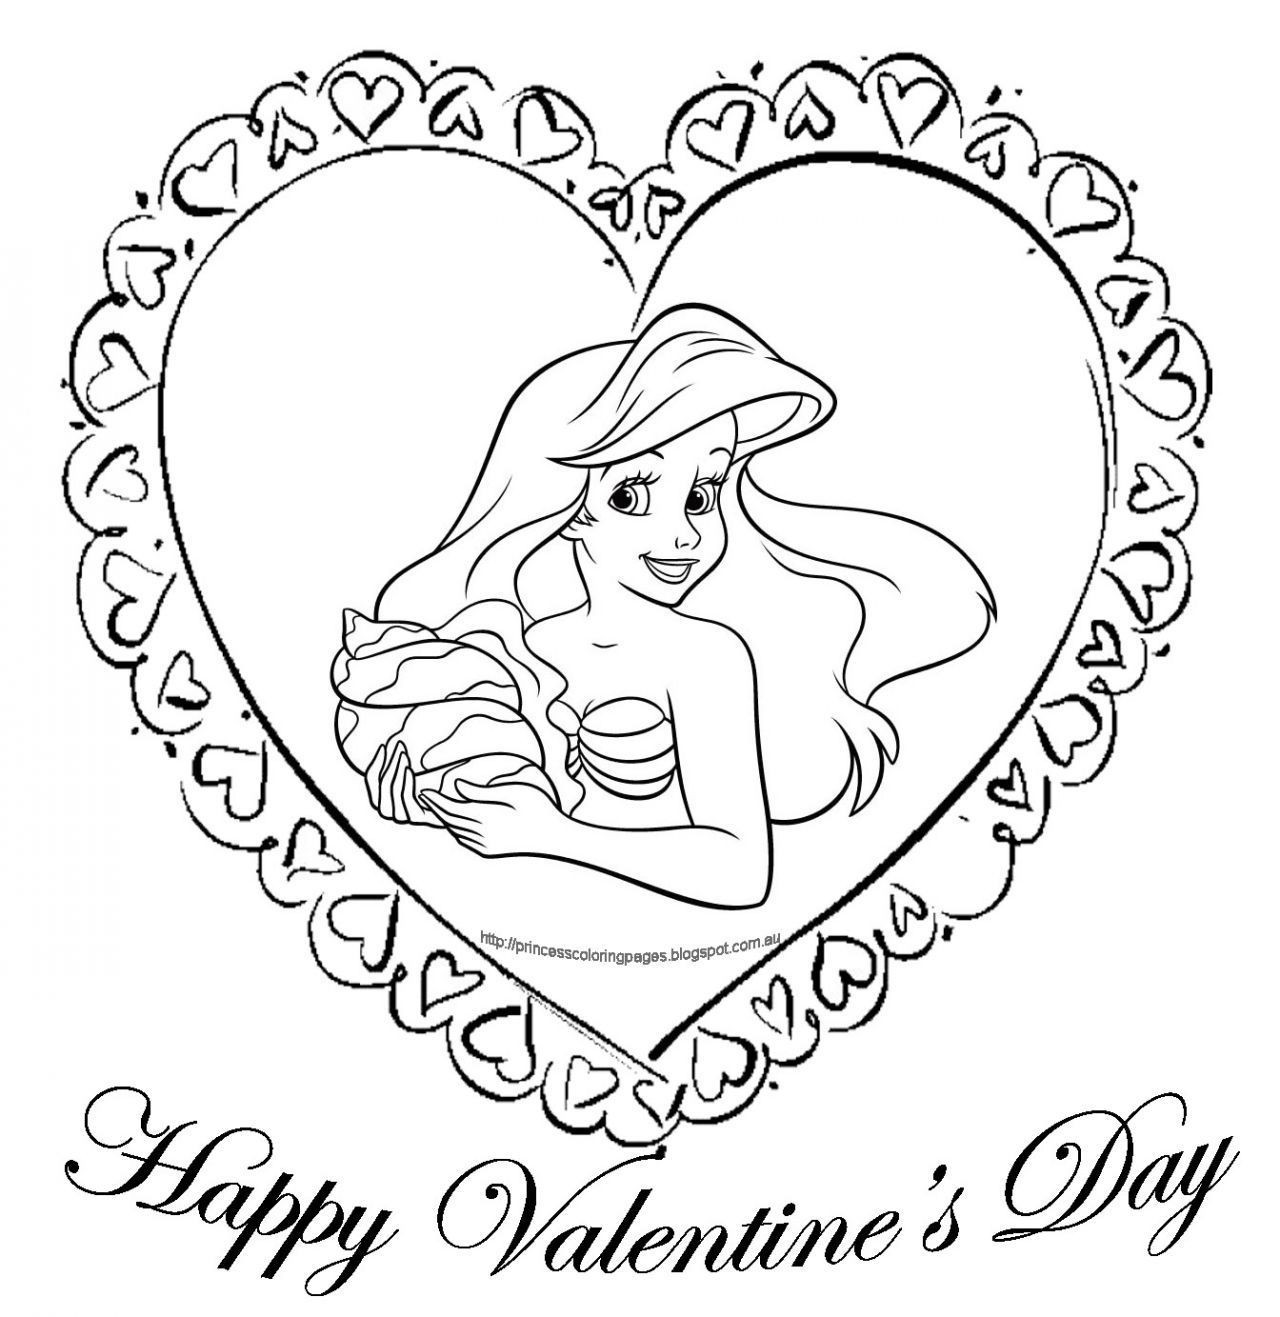 Princess Valentines Day Coloring Pages Wallpaper